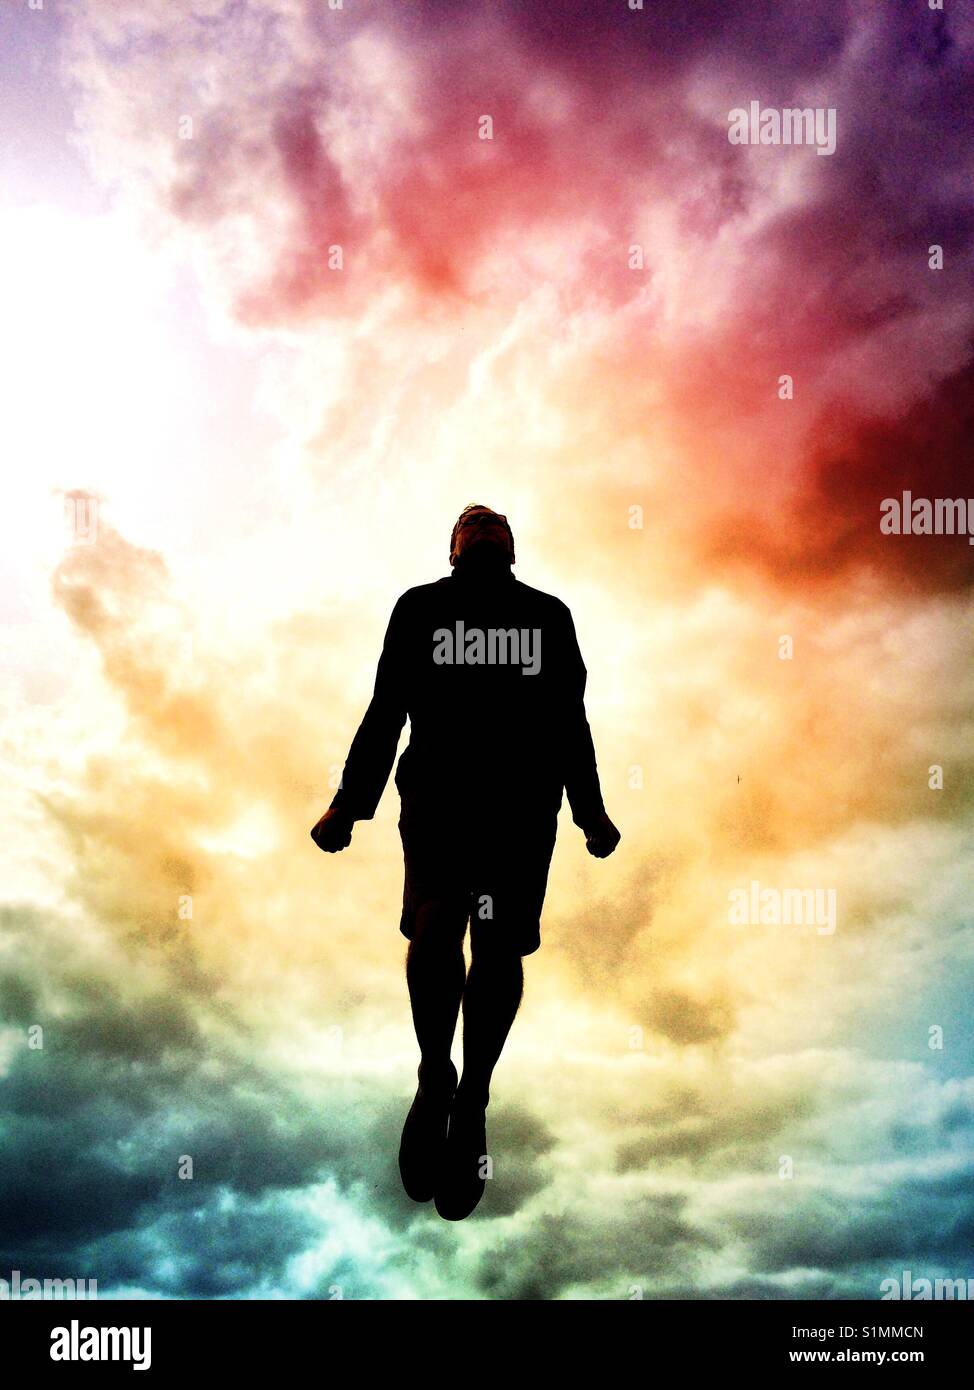 The figure or silhouette of a man floating or jumping high in the sky with a colourful, stormy sky behind. Stock Photo